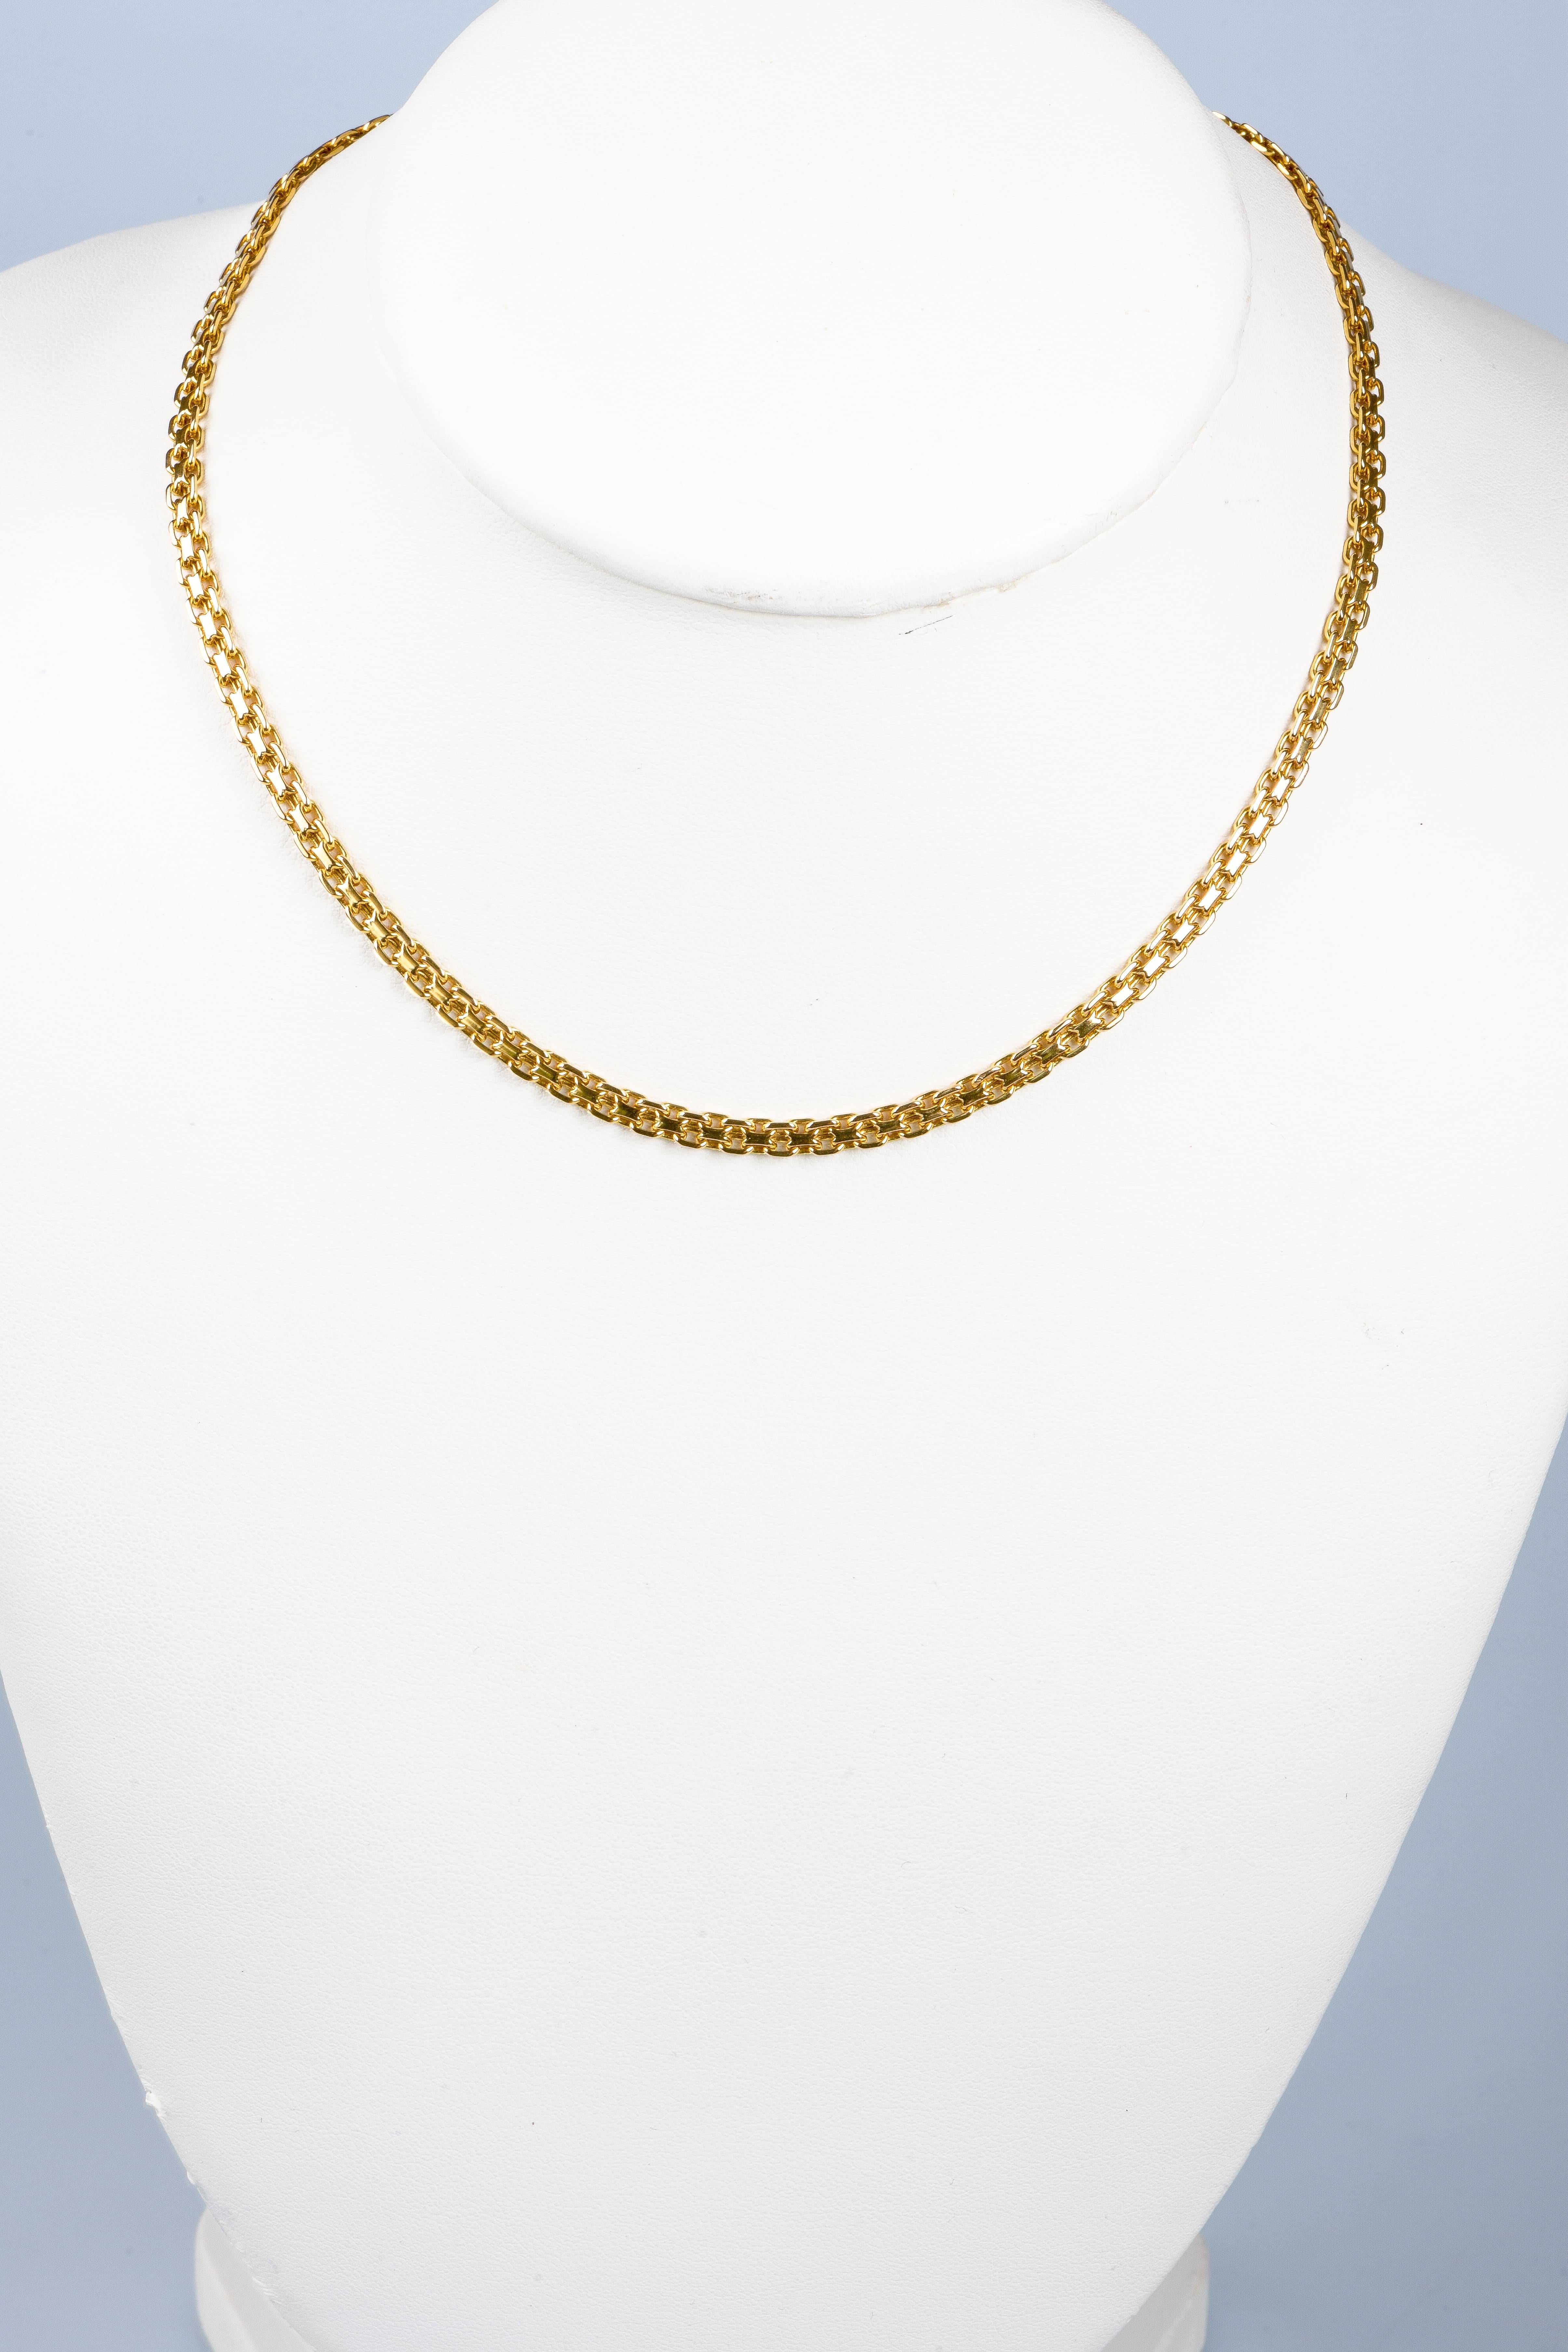 18-carats yellow gold chain with double solid chain and alternating forced mesh to create a unique and elegant design. This chain can be worn on any occasion, whether for a formal evening or a casual day.


Weight: 14.3 gr. 

Dimensions: 38cm x